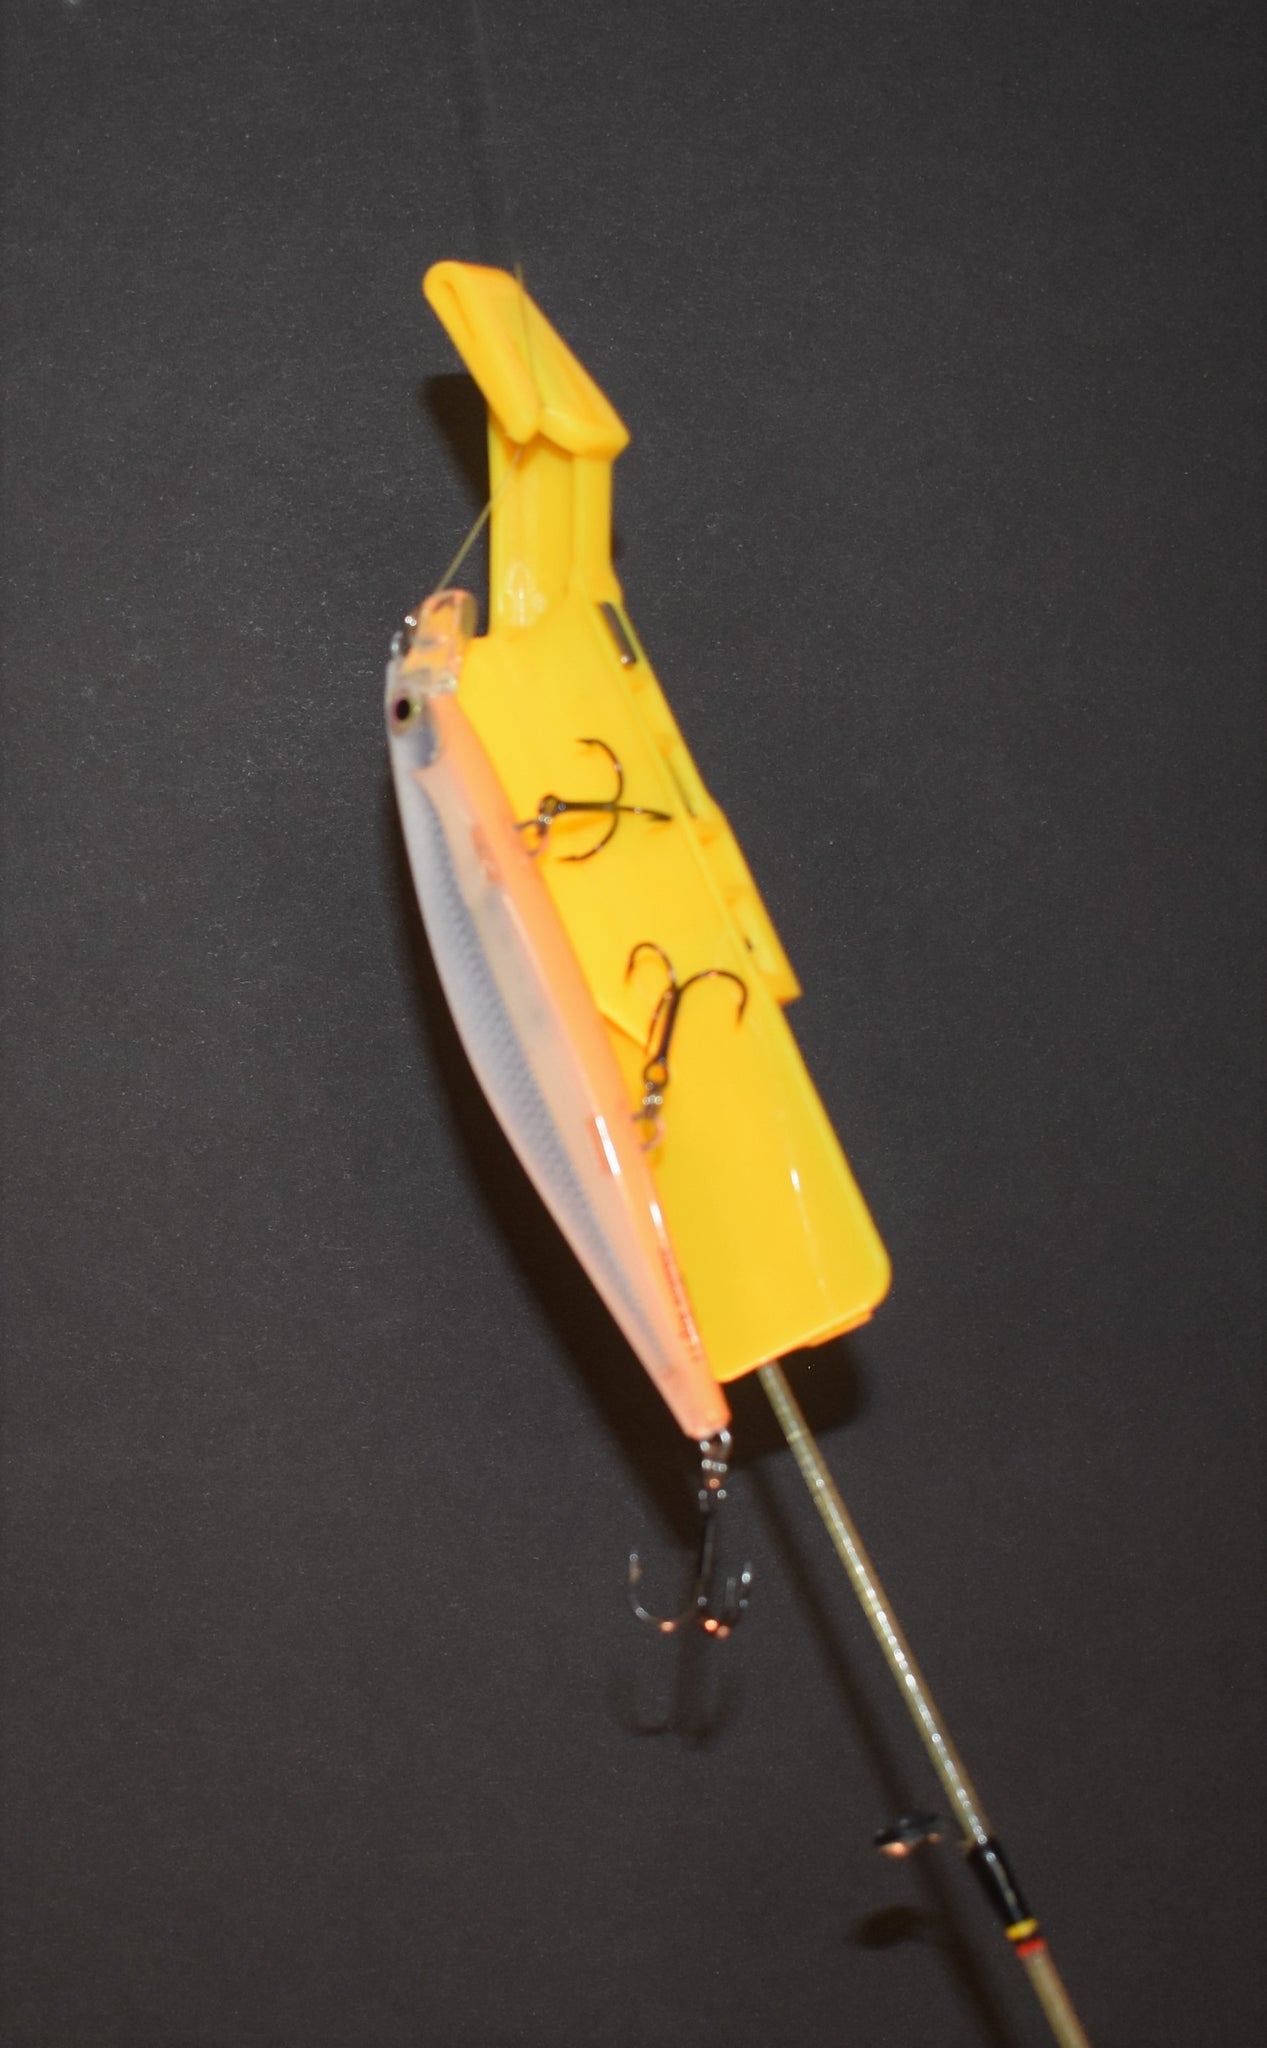 CatchALure Fly & Lure Retrieval Tool for Fly & Conventional Fishing